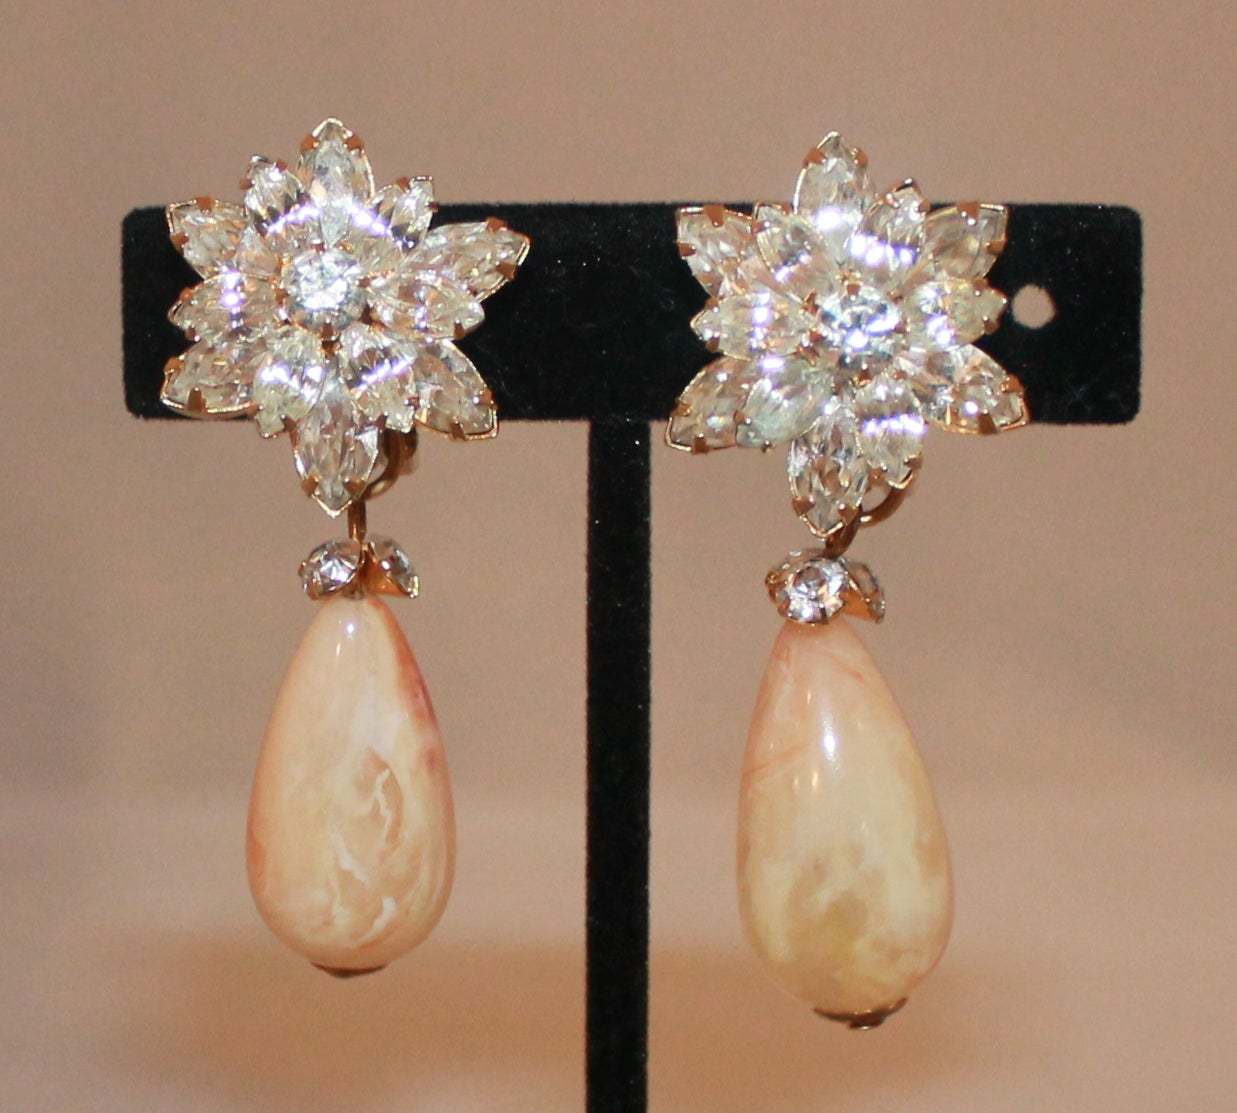 Vintage Agate Stone & Rhinestone Clip Earrings - circa 1980s. These earrings are in excellent condition.

Length- 2.25